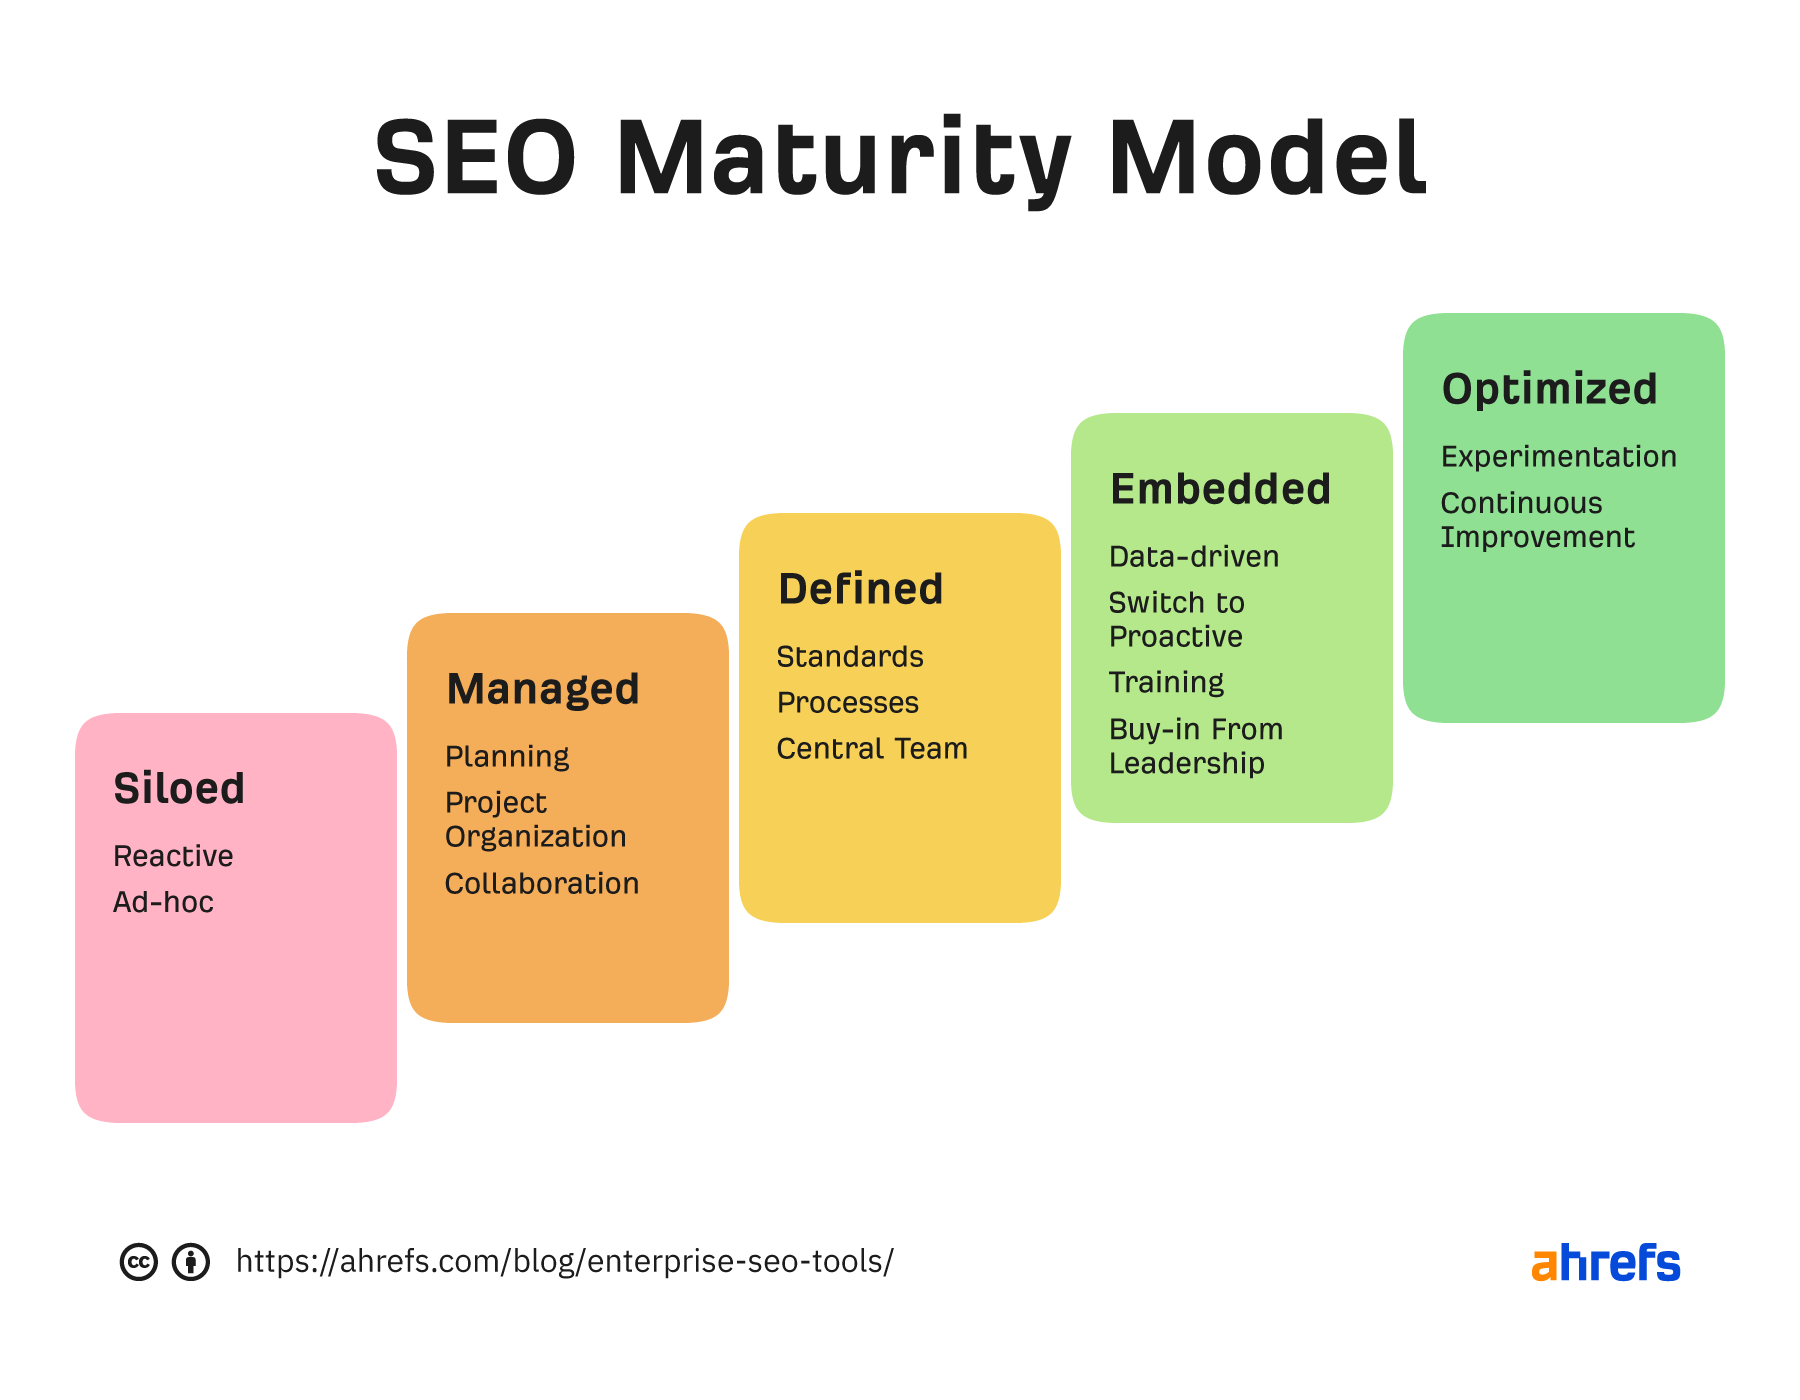 An image describing the different levels of SEO maturity that most companies go through